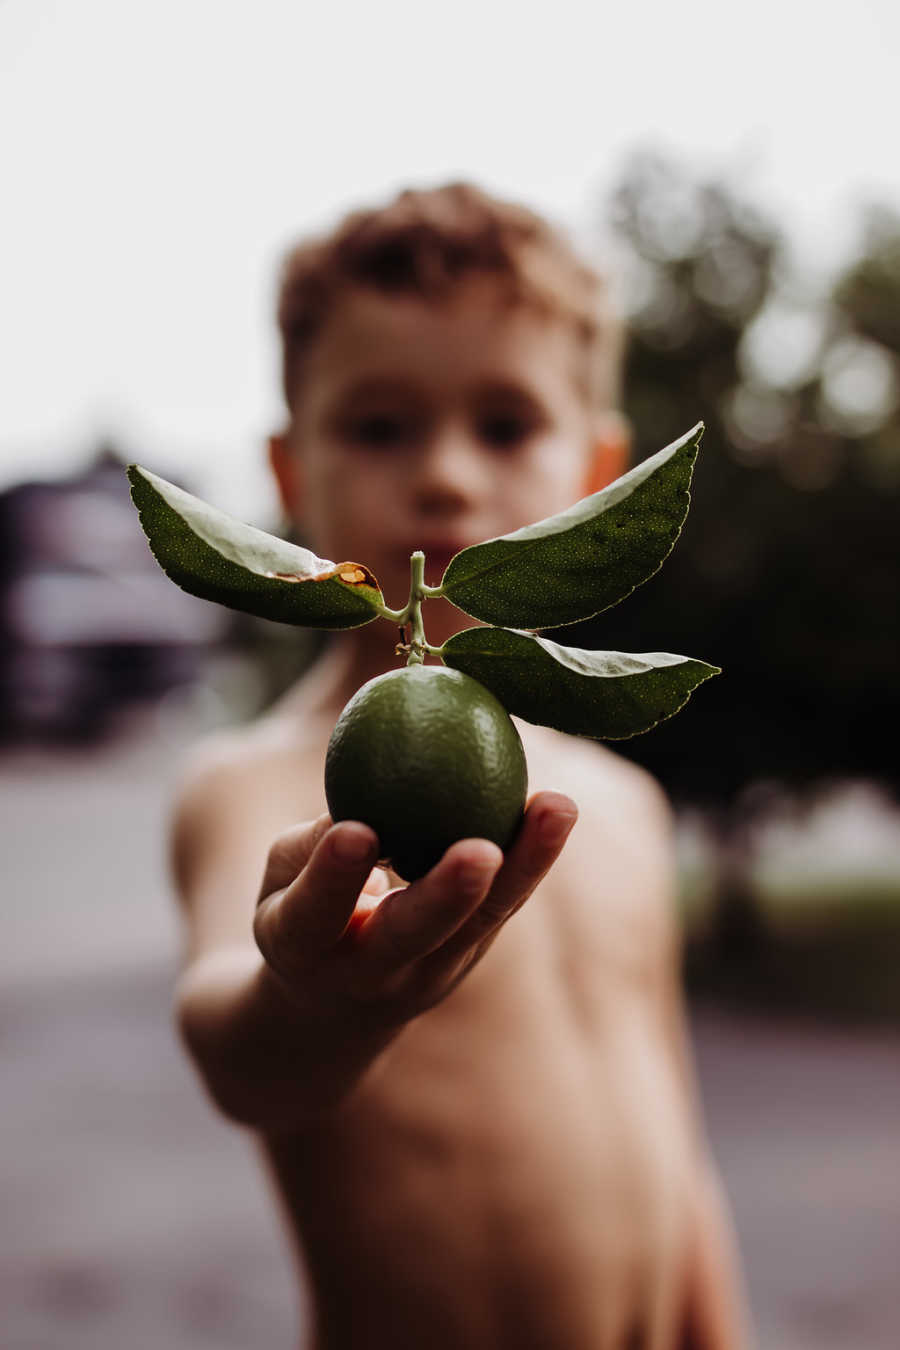 Shirtless little boy stands holding out lime from citrus tree